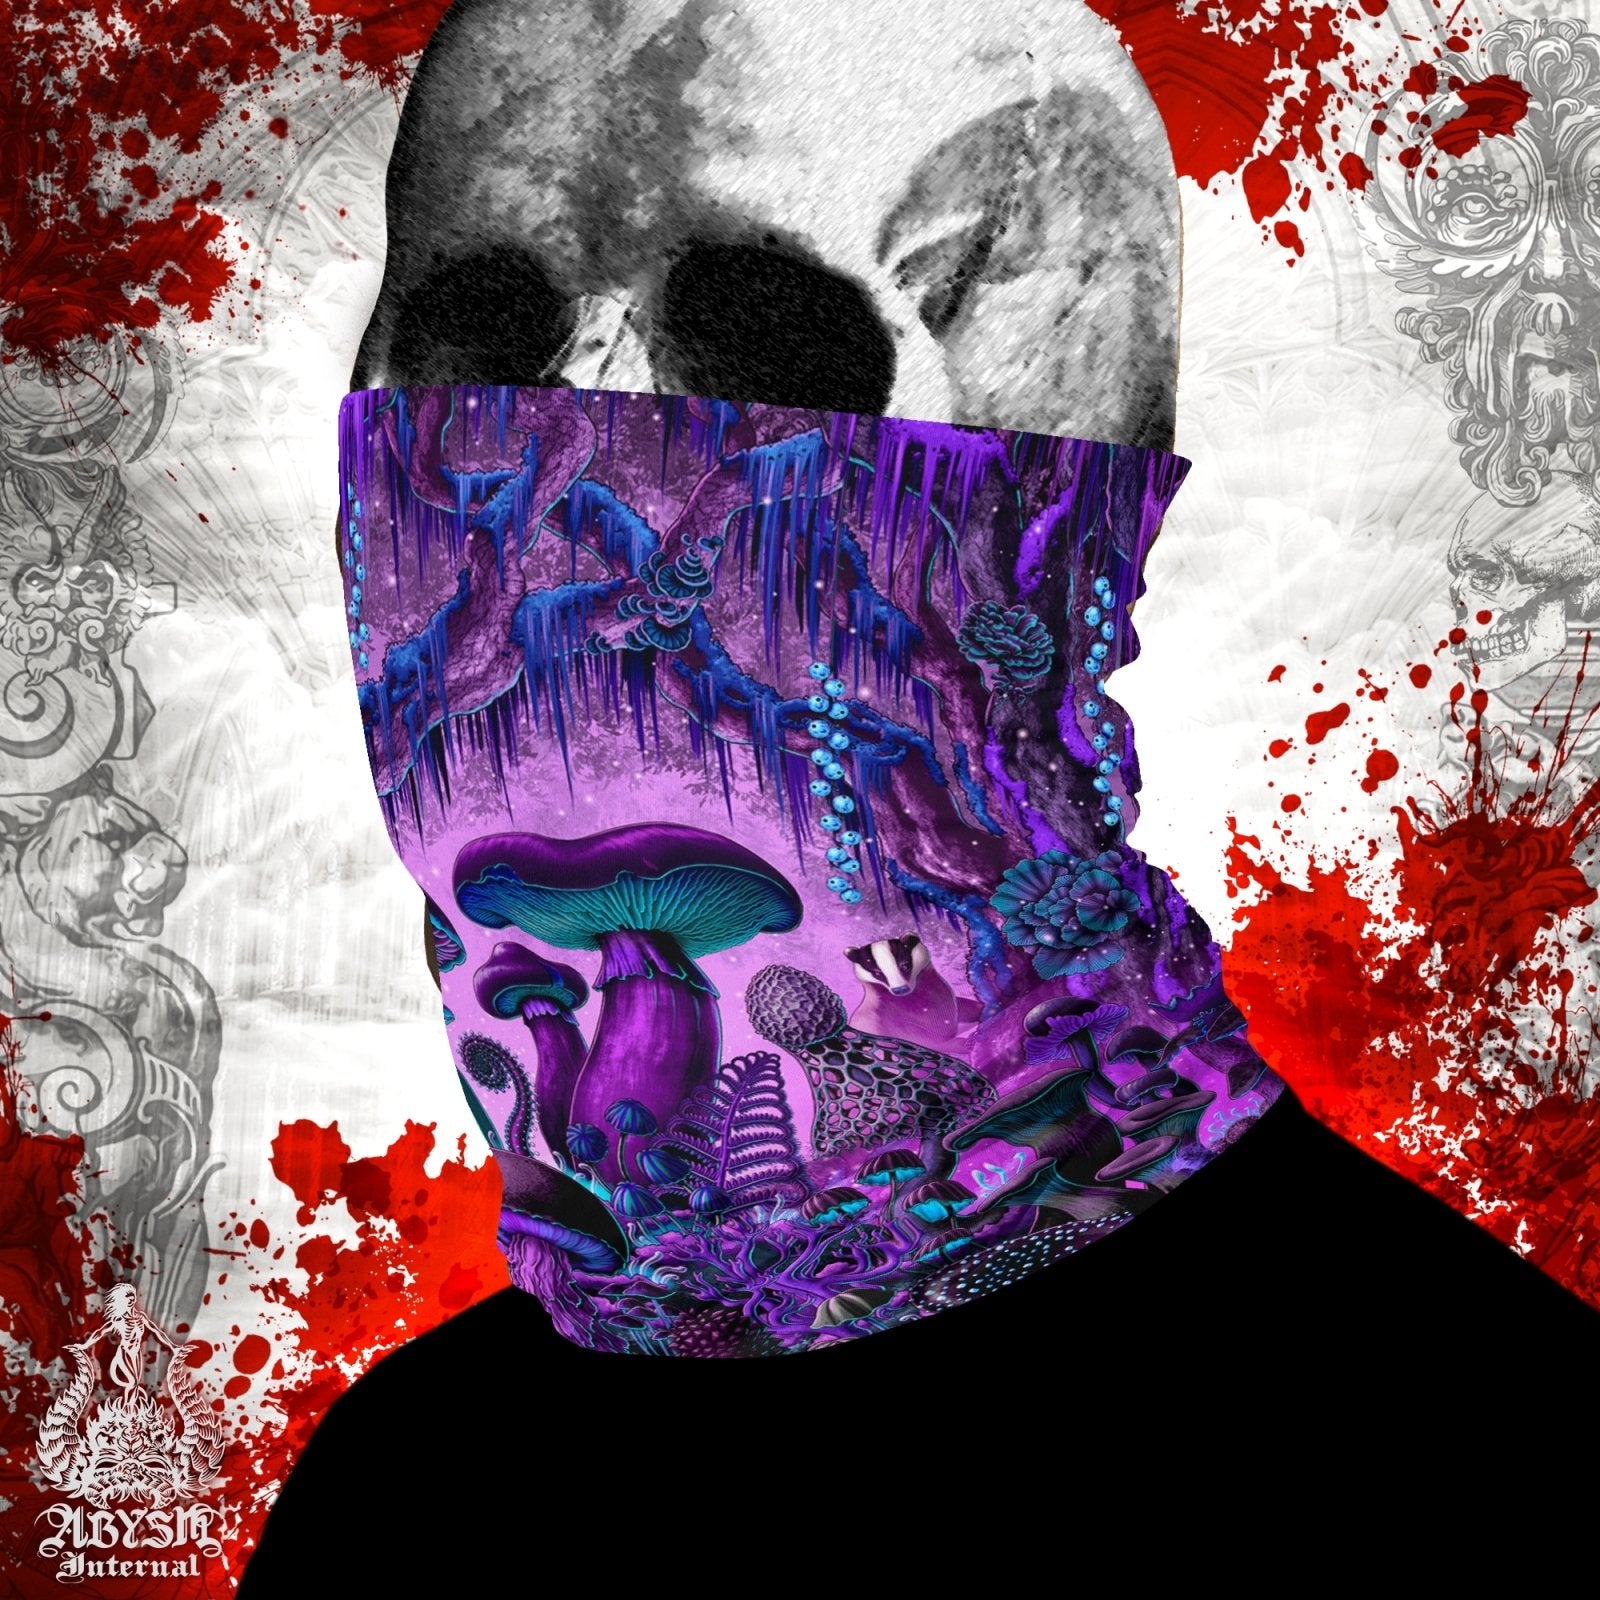 Gothic Mushrooms Neck Gaiter, Pastel Goth Face Mask, Head Covering, Magic Shrooms Art, Indie Festival Outfit, Mycologyst Gift - Purple - Abysm Internal